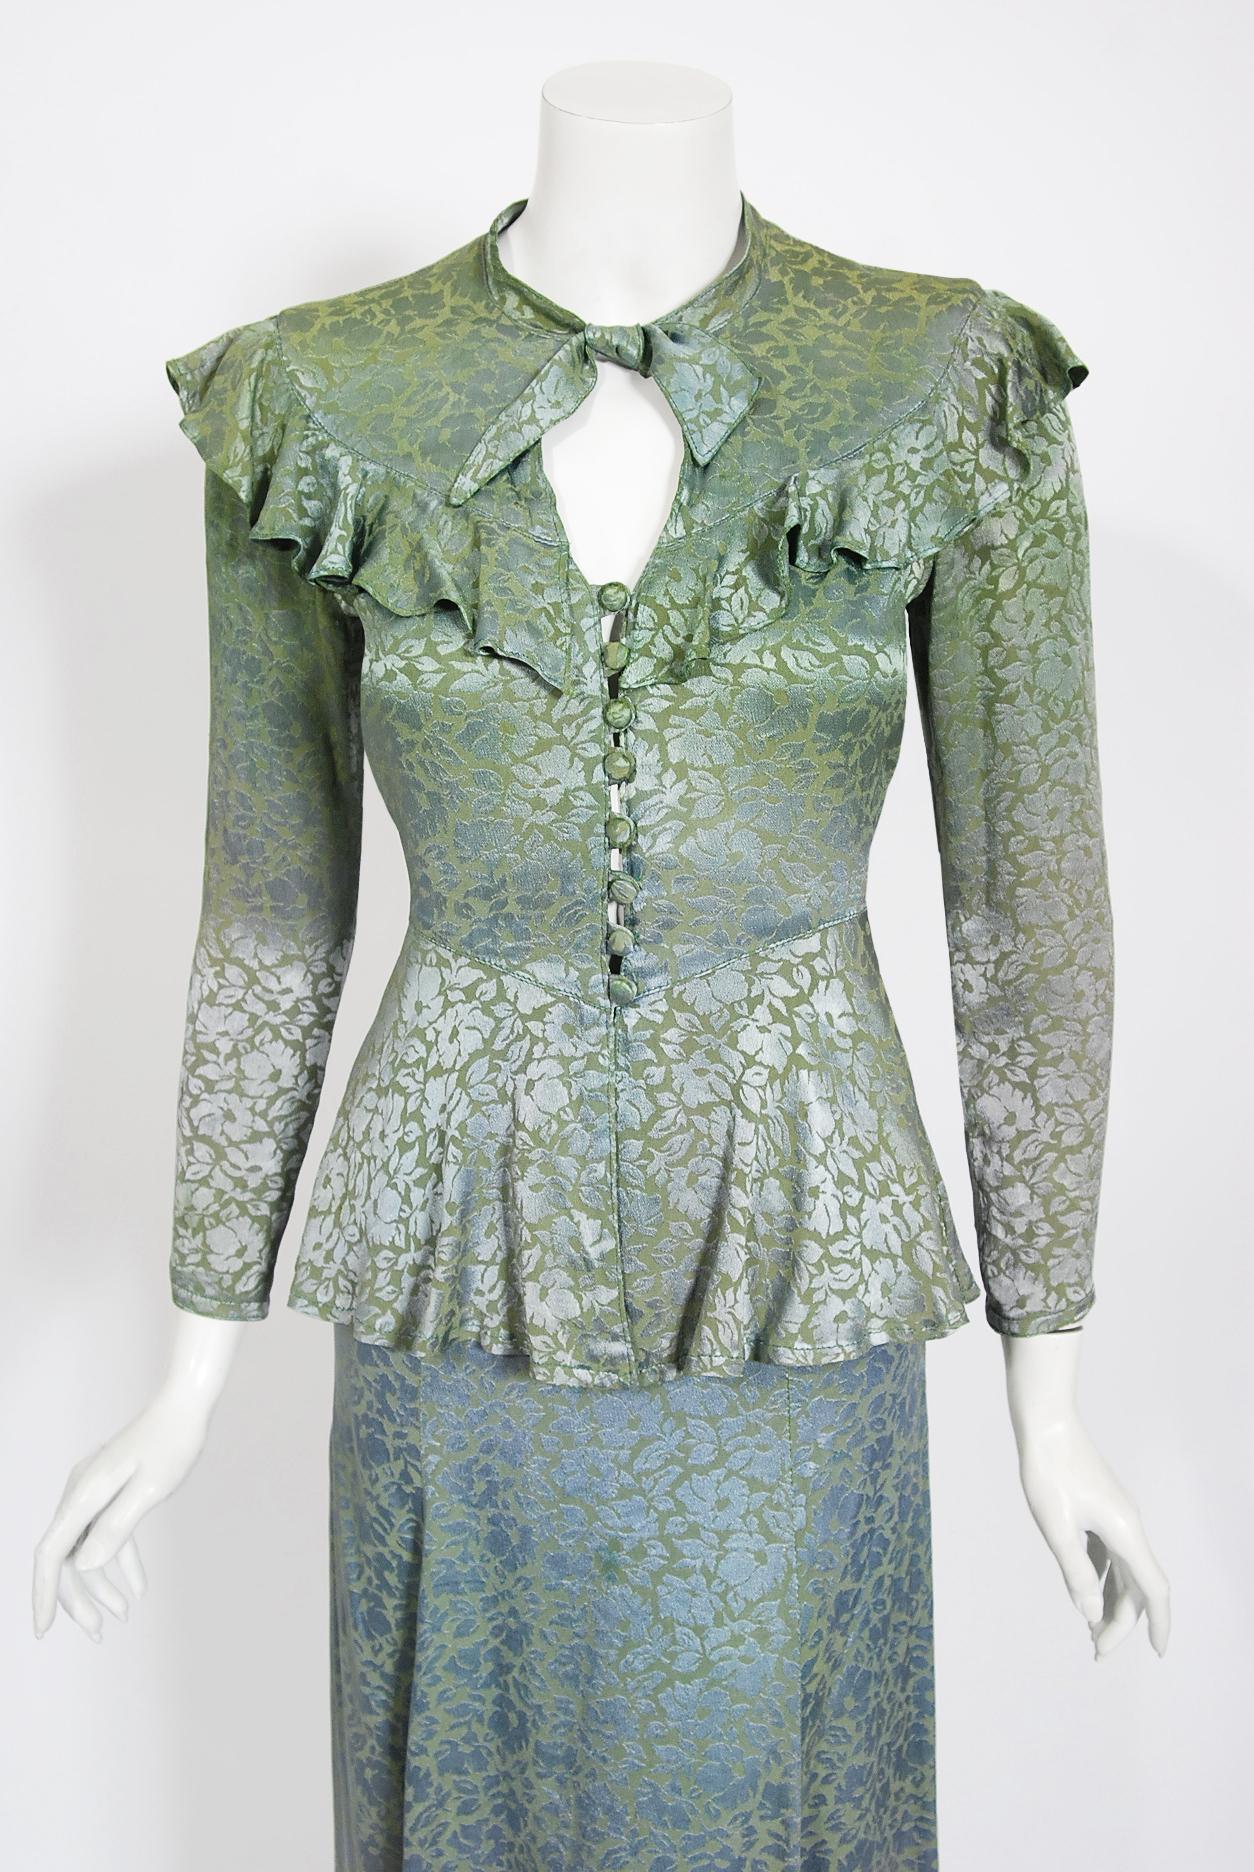 A totally gorgeous Ossie Clark for Radley blue green floral print damask satin peplum blouse with matching skirt dating back to the mid-1970's. English fashion designer, Raymond 